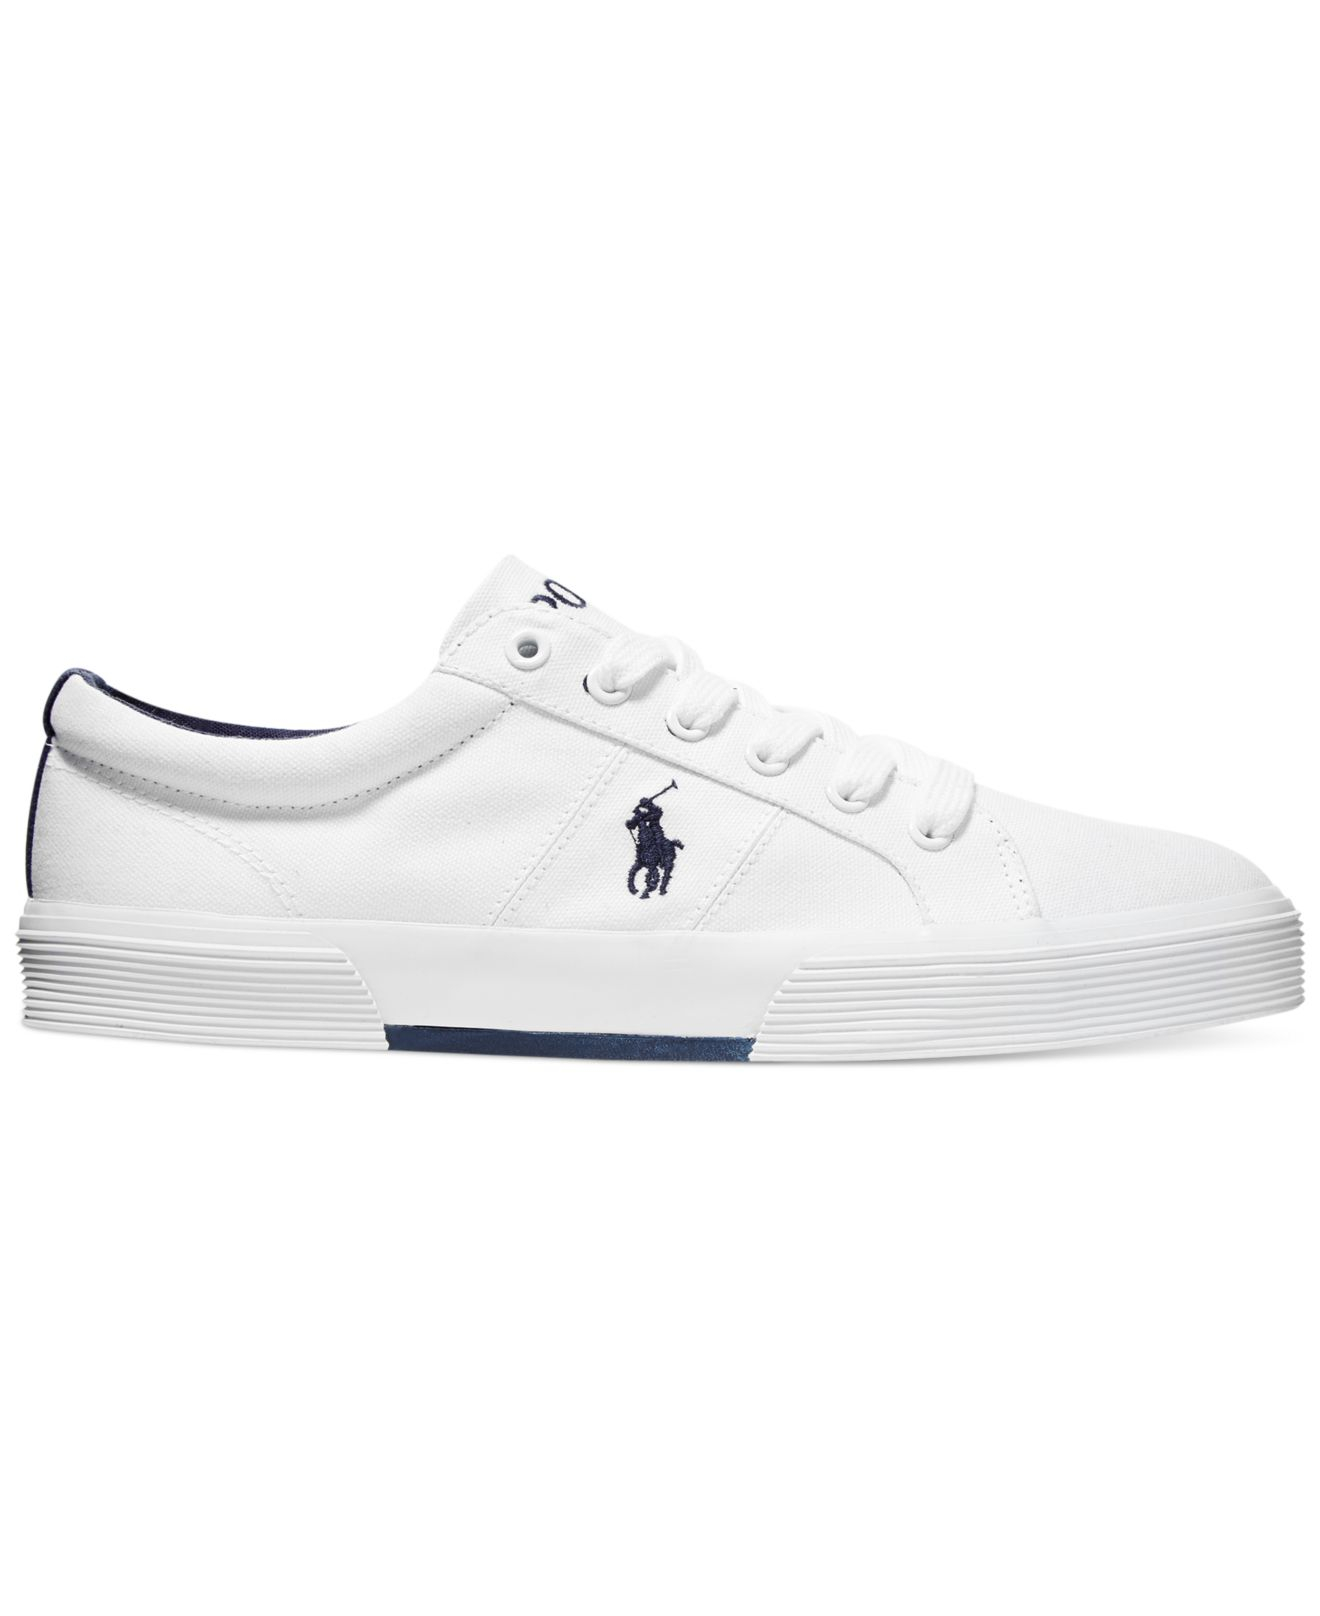 Polo Ralph Lauren Canvas Sneakers in White |